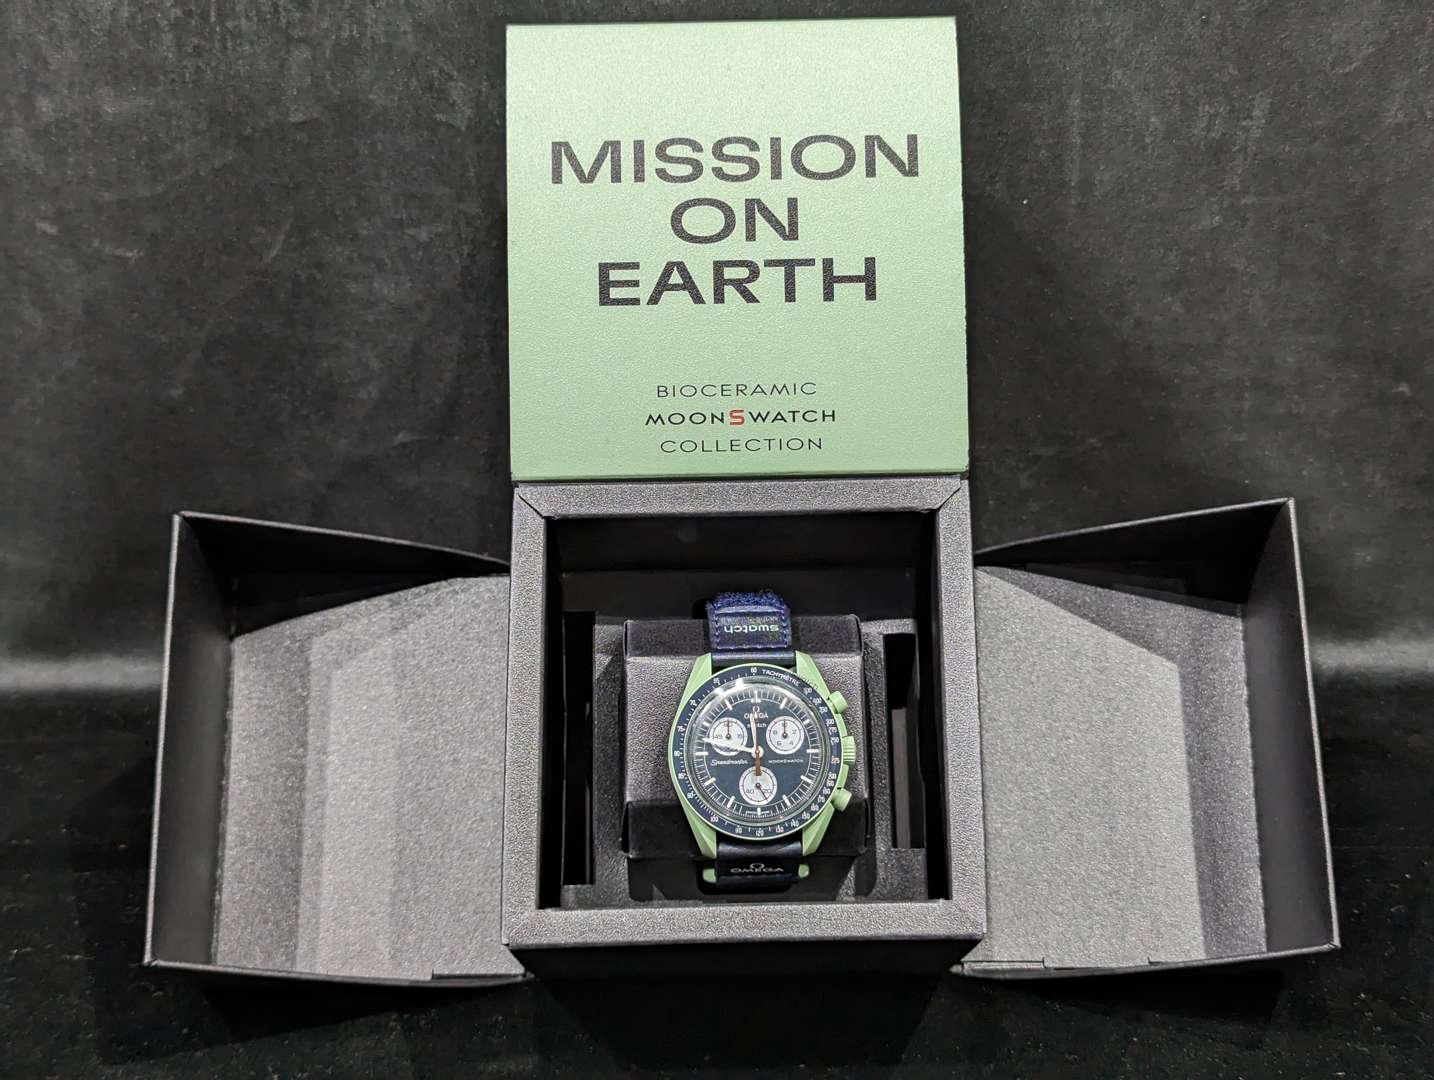 <p>Omega Swatch “Mission on Earth” men's watch</p>